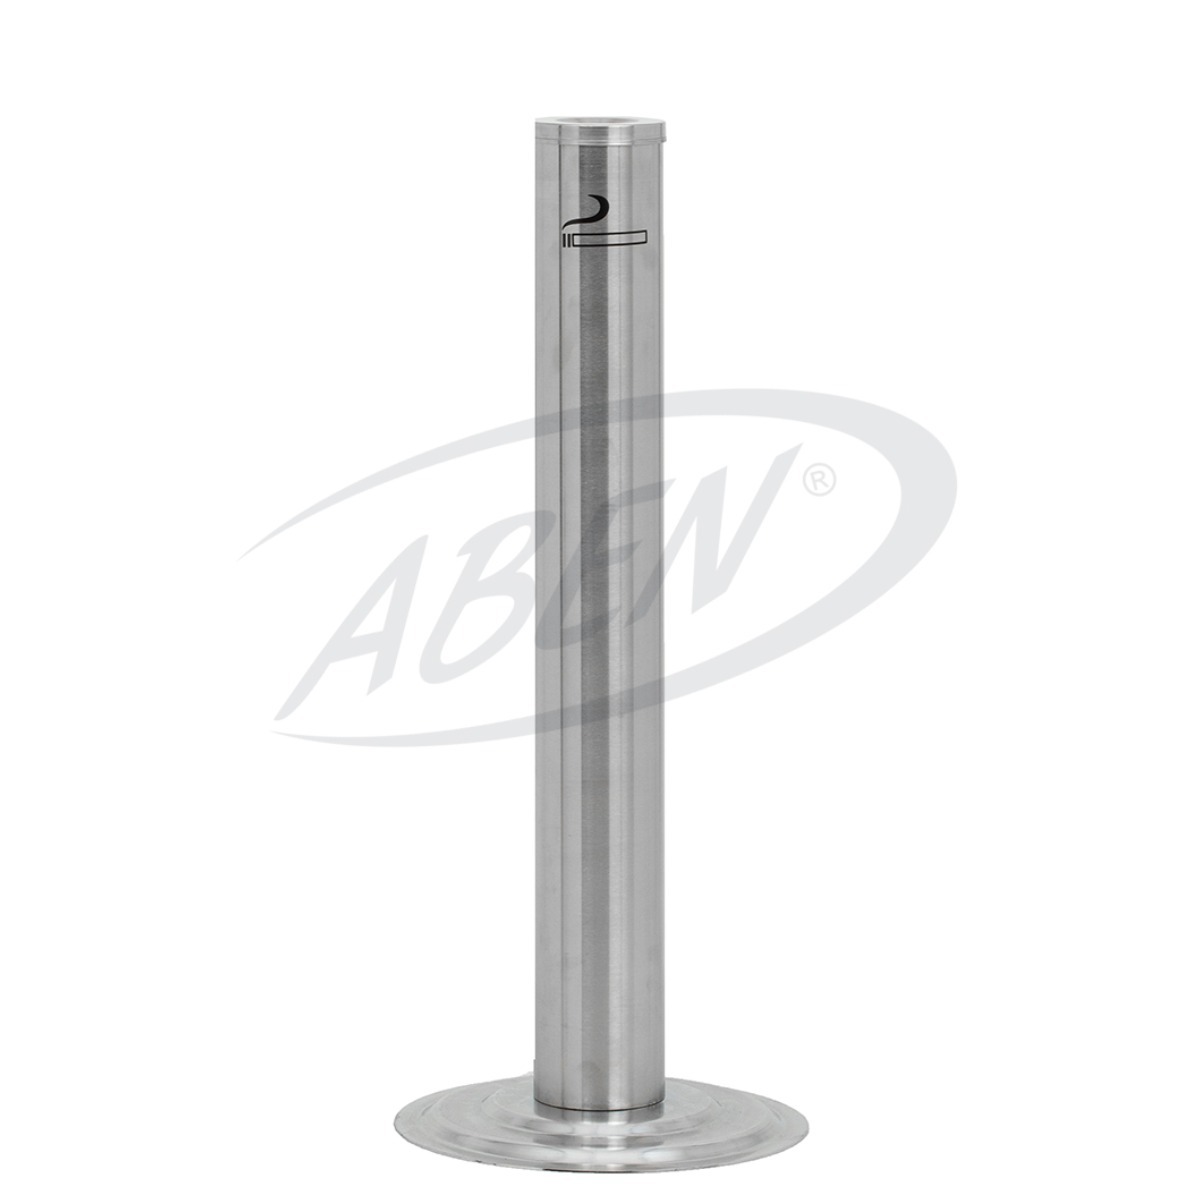 AB-103 Outdoor Ashtray Stainless product logo